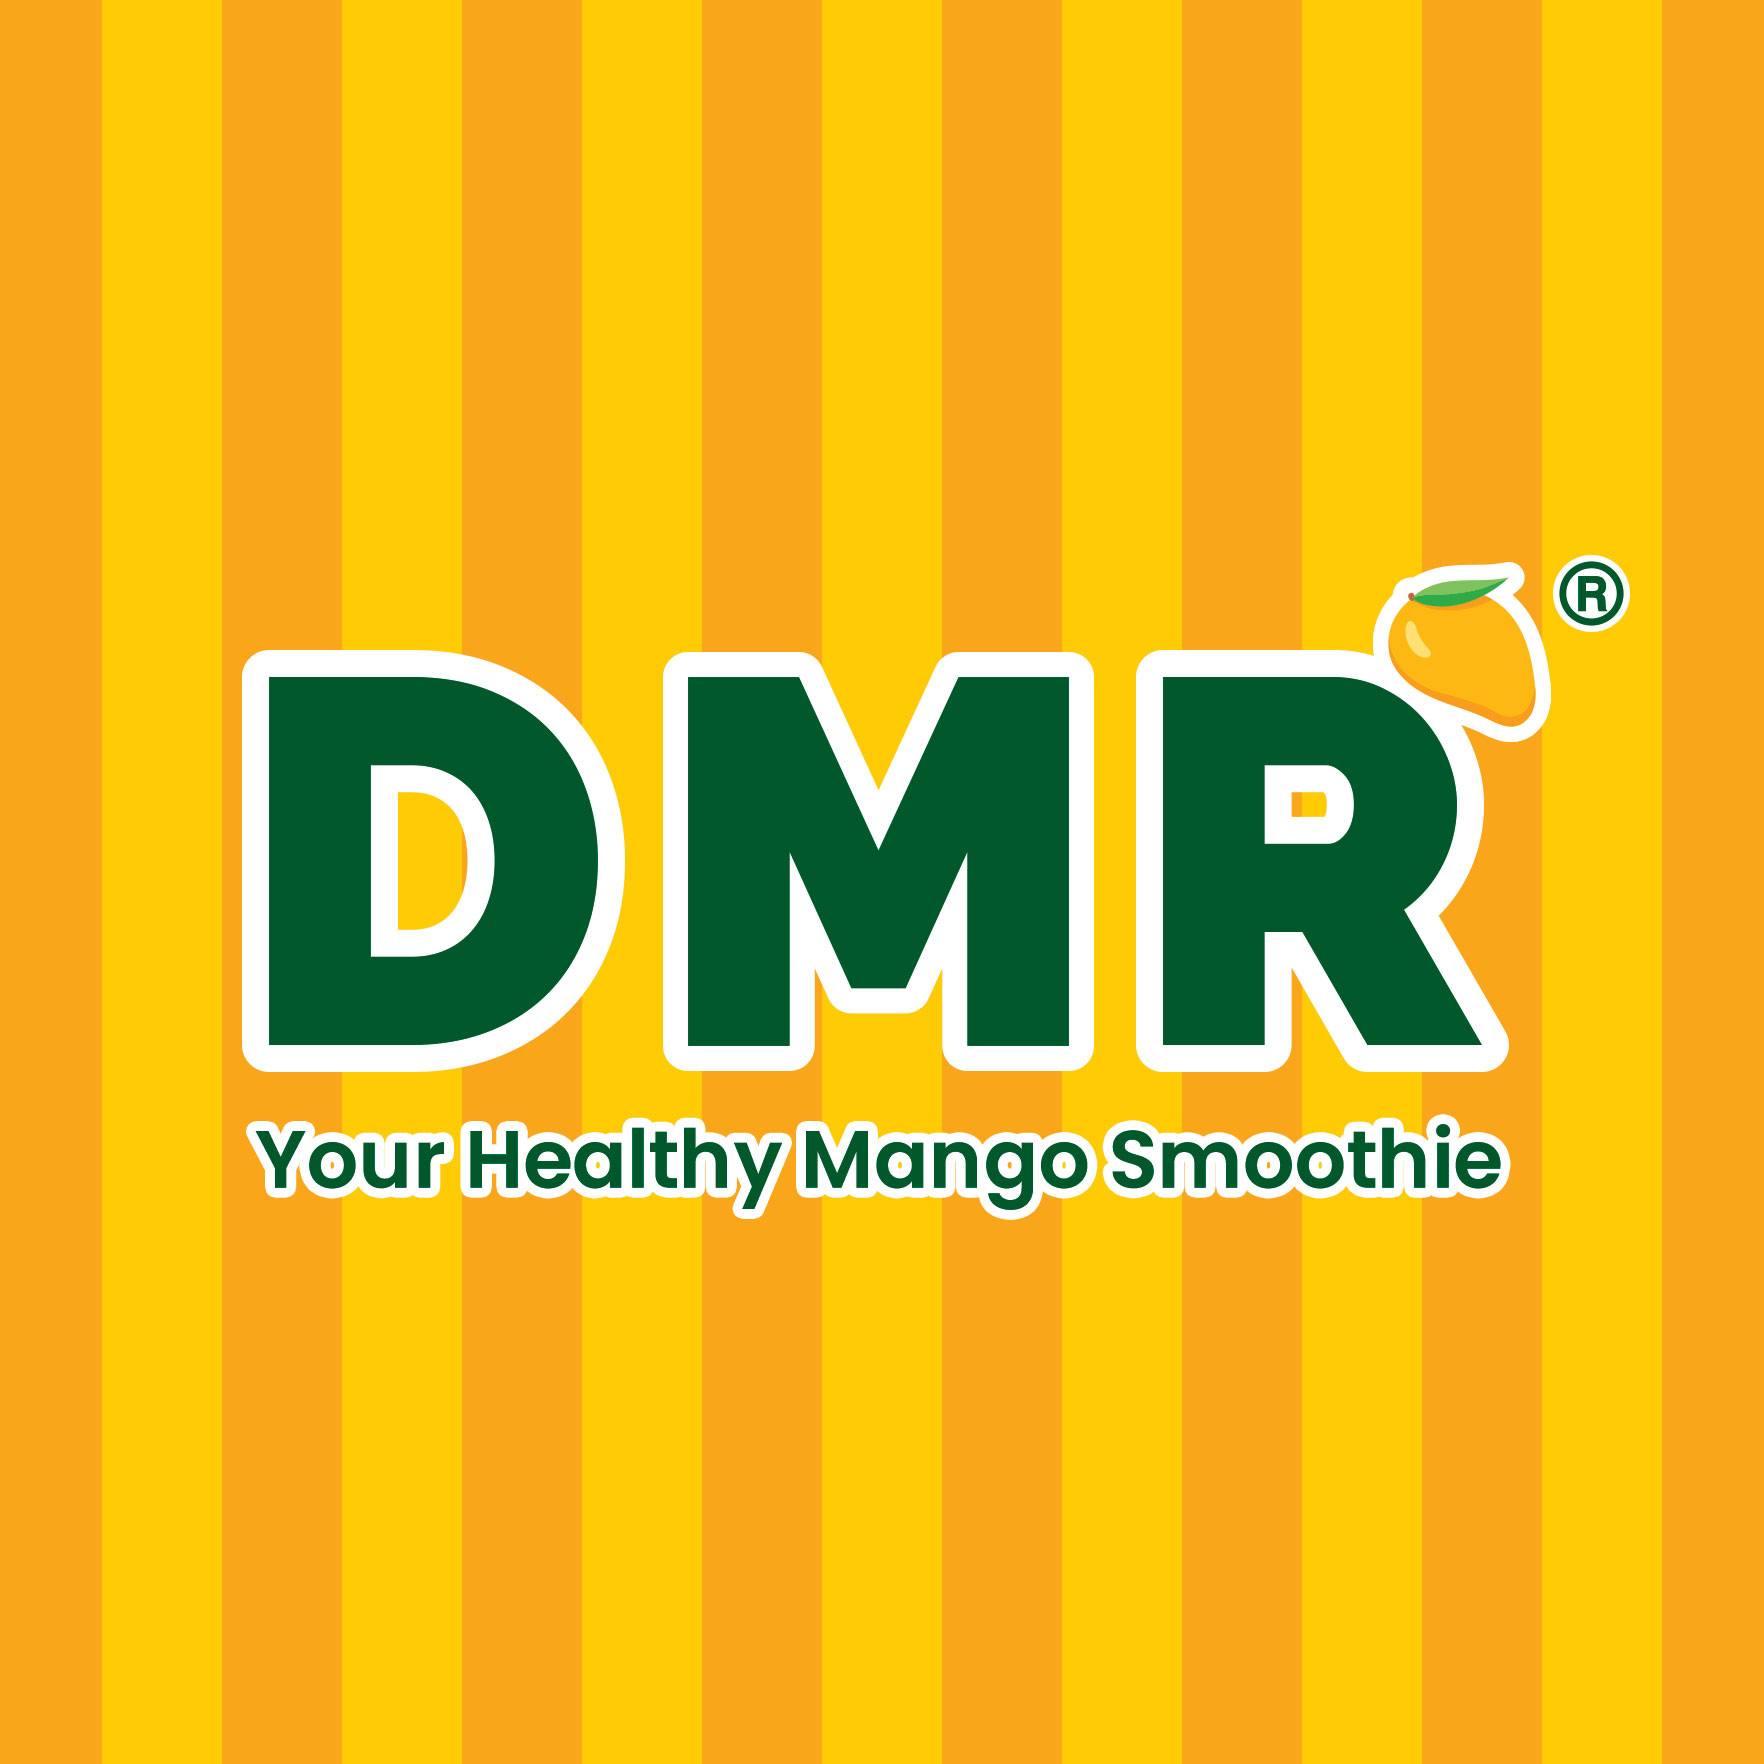 DMR YOUR HEALTHY MANGO SMOOTHIE